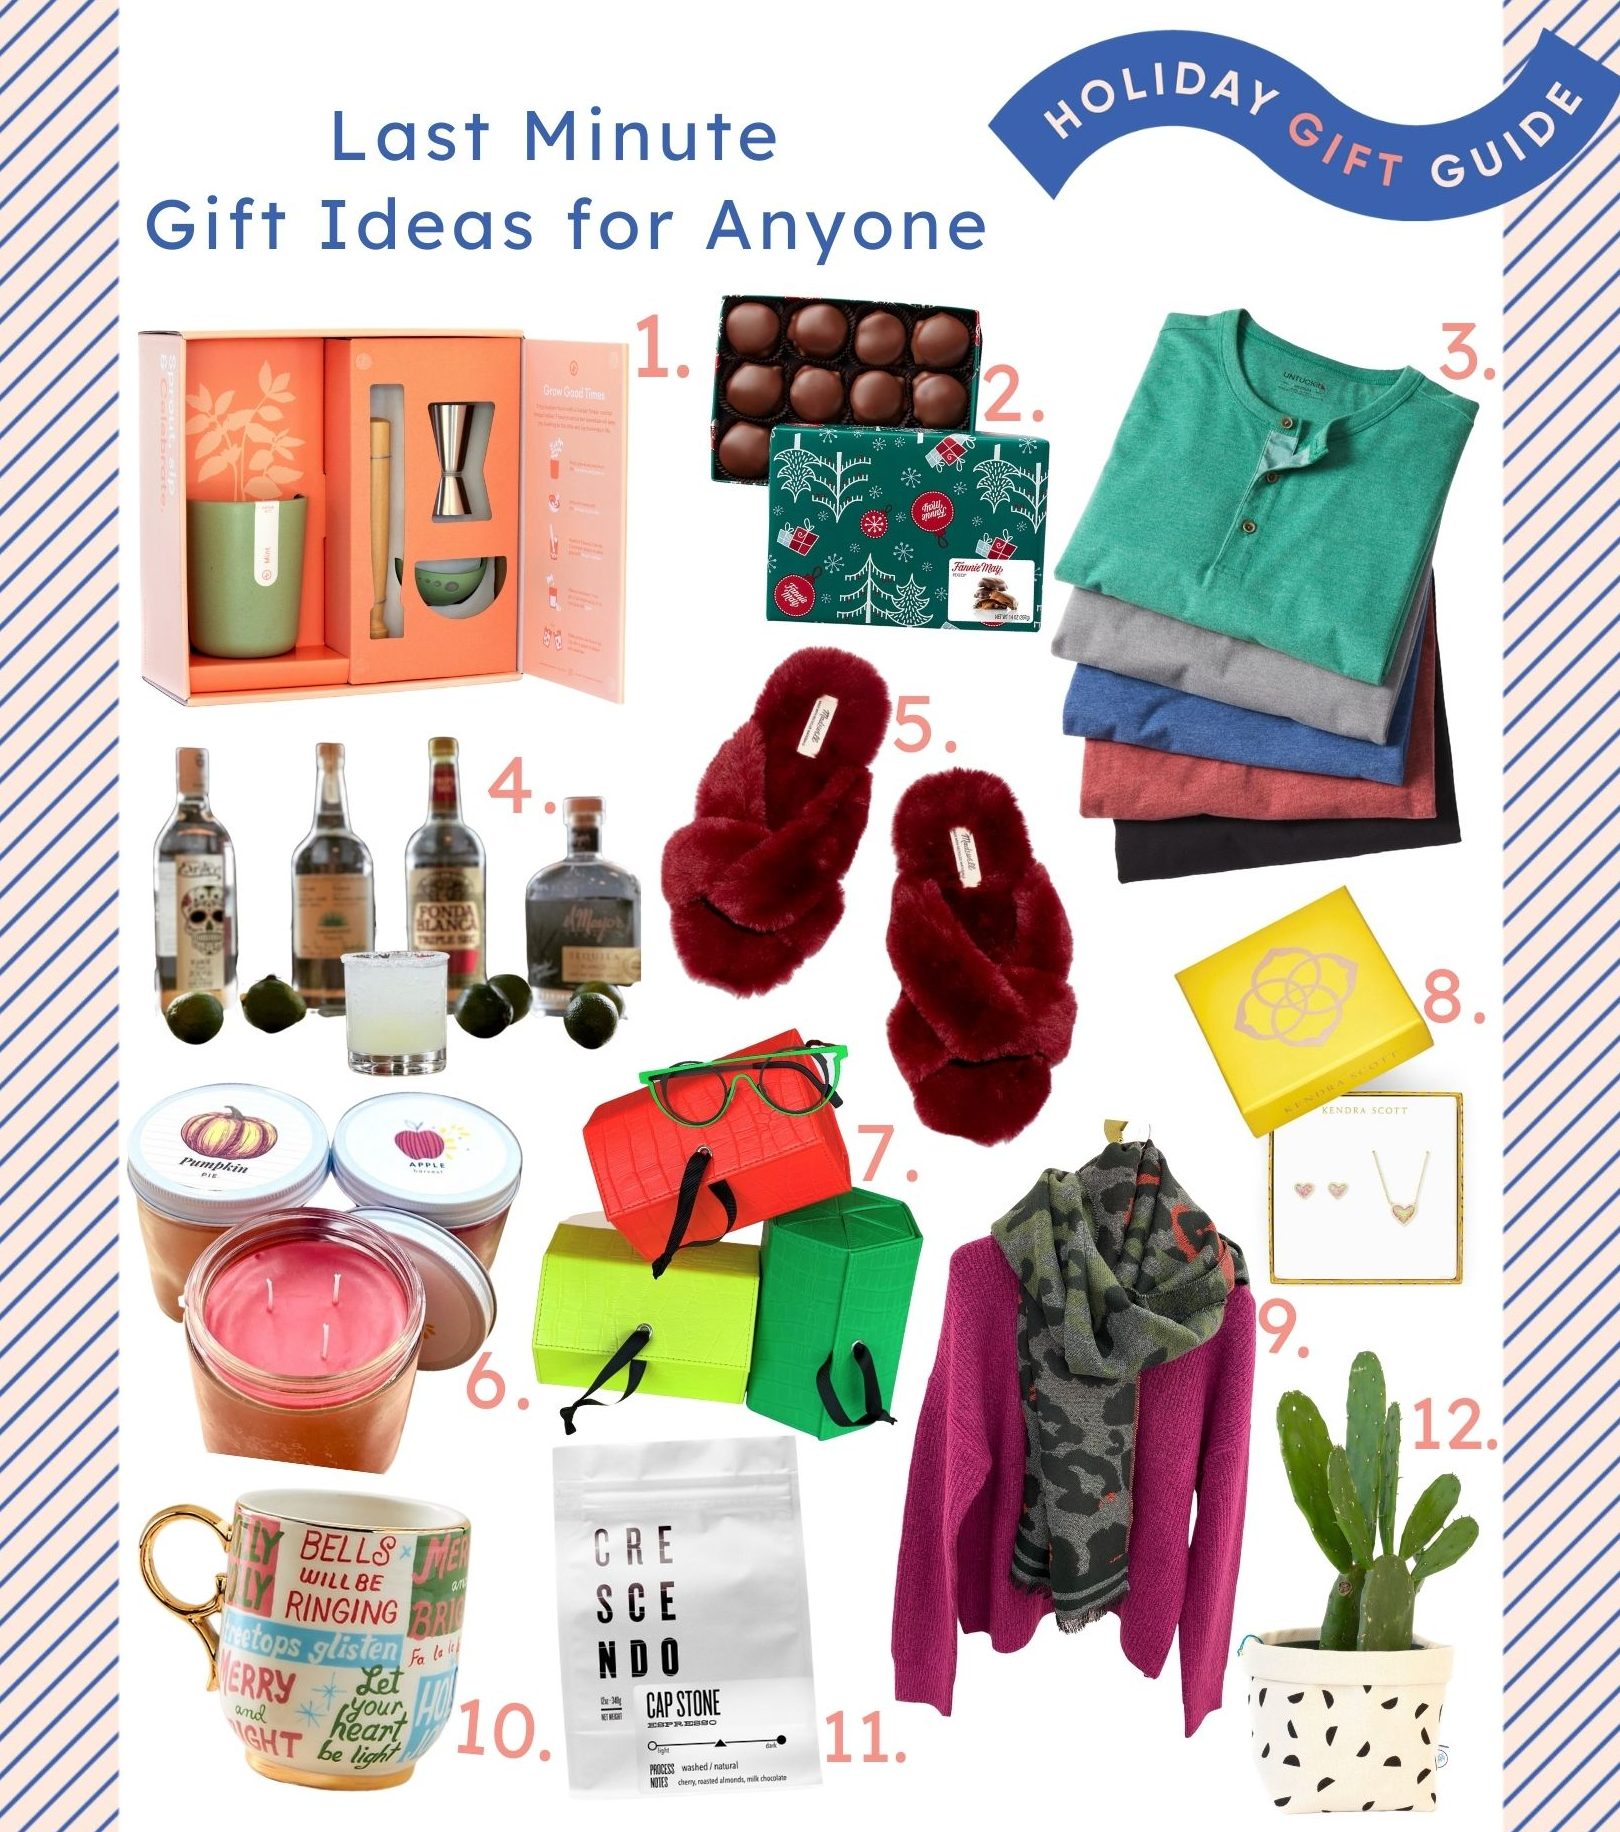 Gifts for Anyone - Hilldale